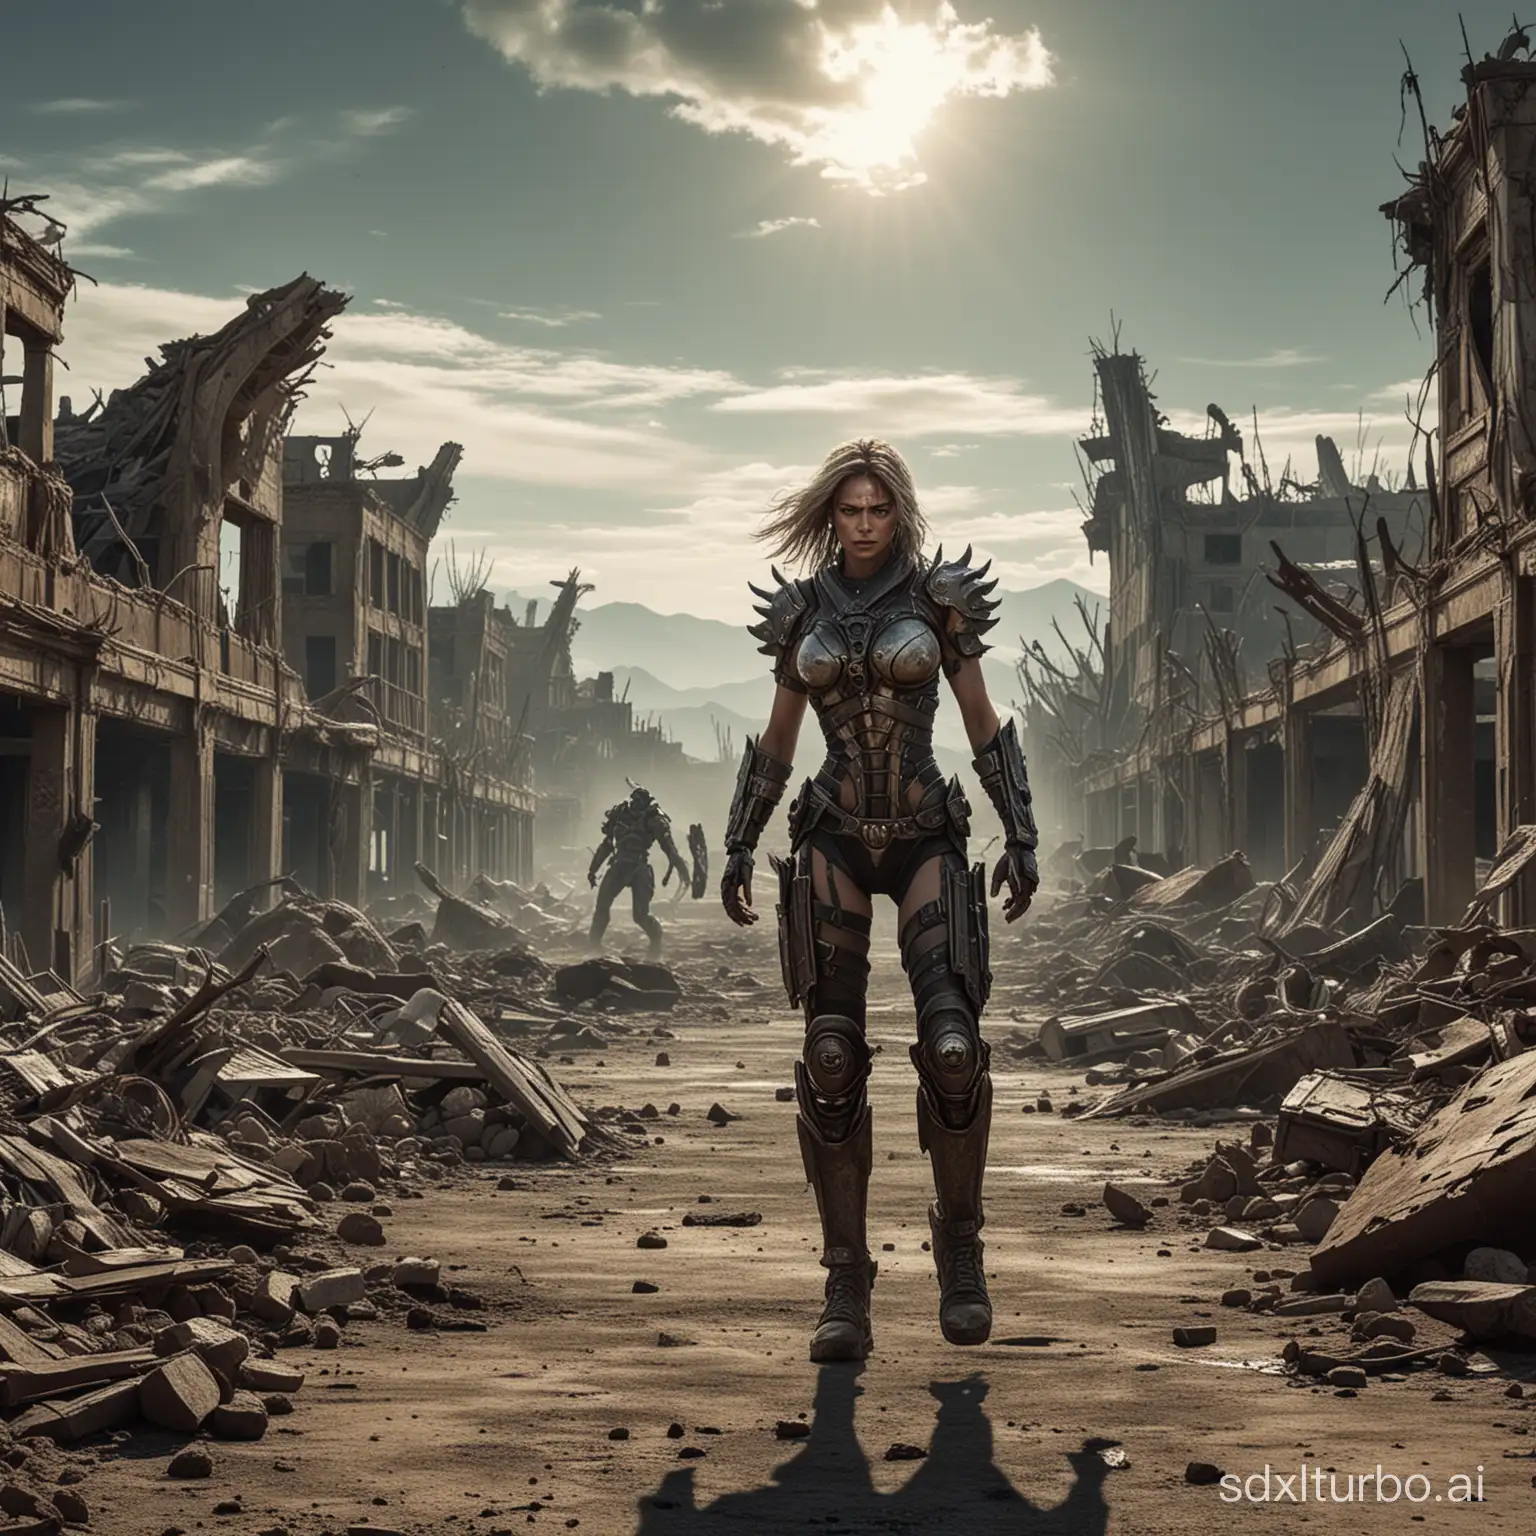 Wasteland style, movie quality, photography, surreal, virtual, tearing up monsters, monsters, invading Earth, fierce expressions, destruction, ruins, large-scale scenes,